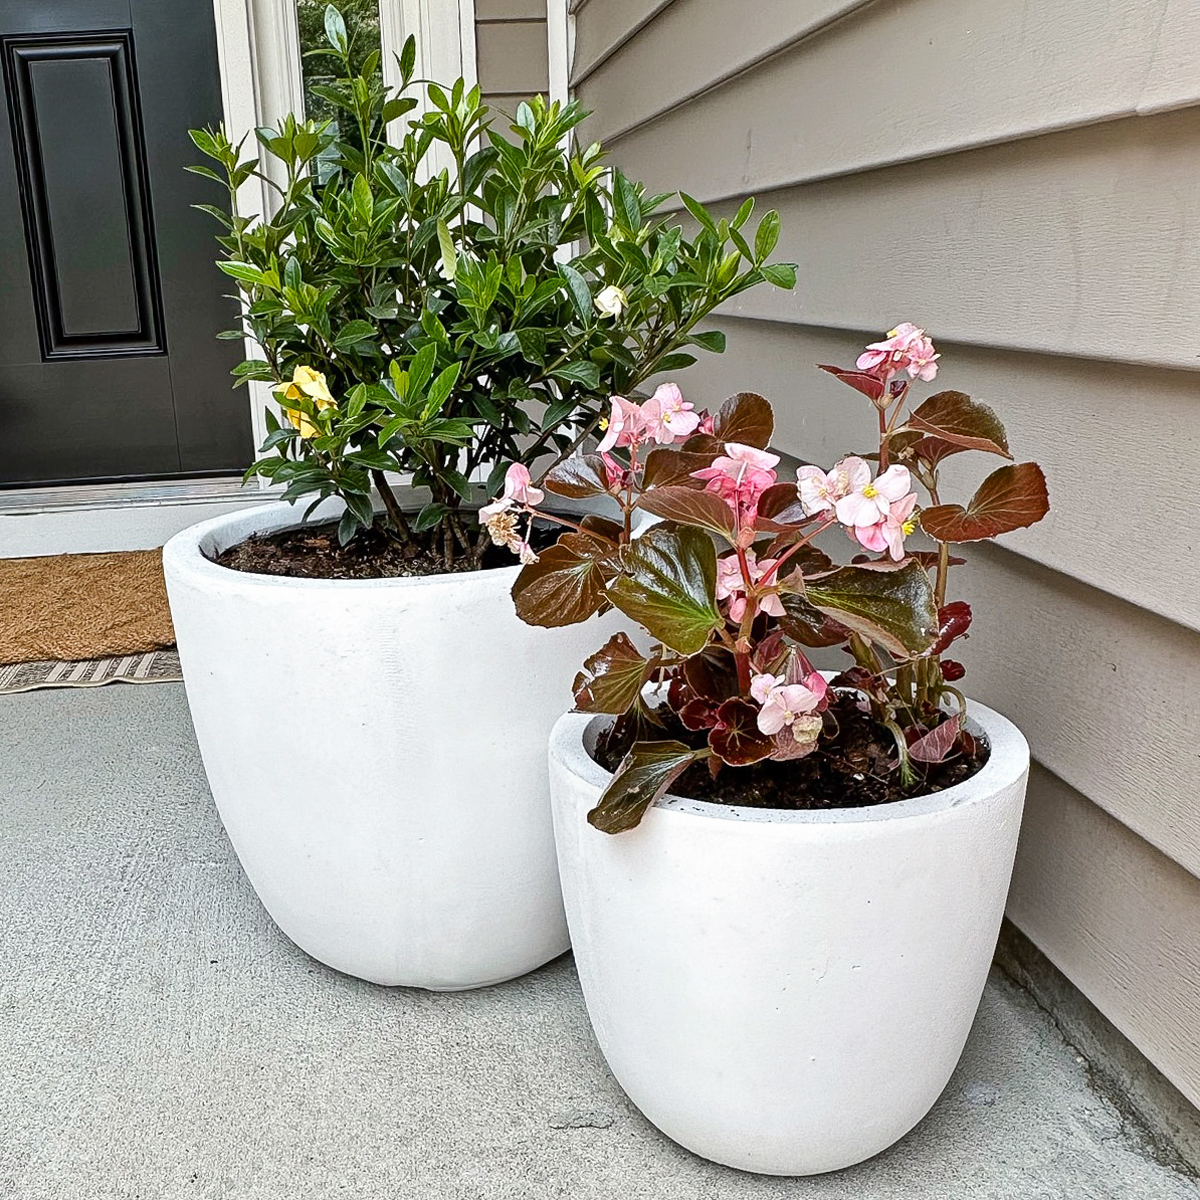 set of two, white, concrete outdoor planters on porch from amazon that are budget friendly